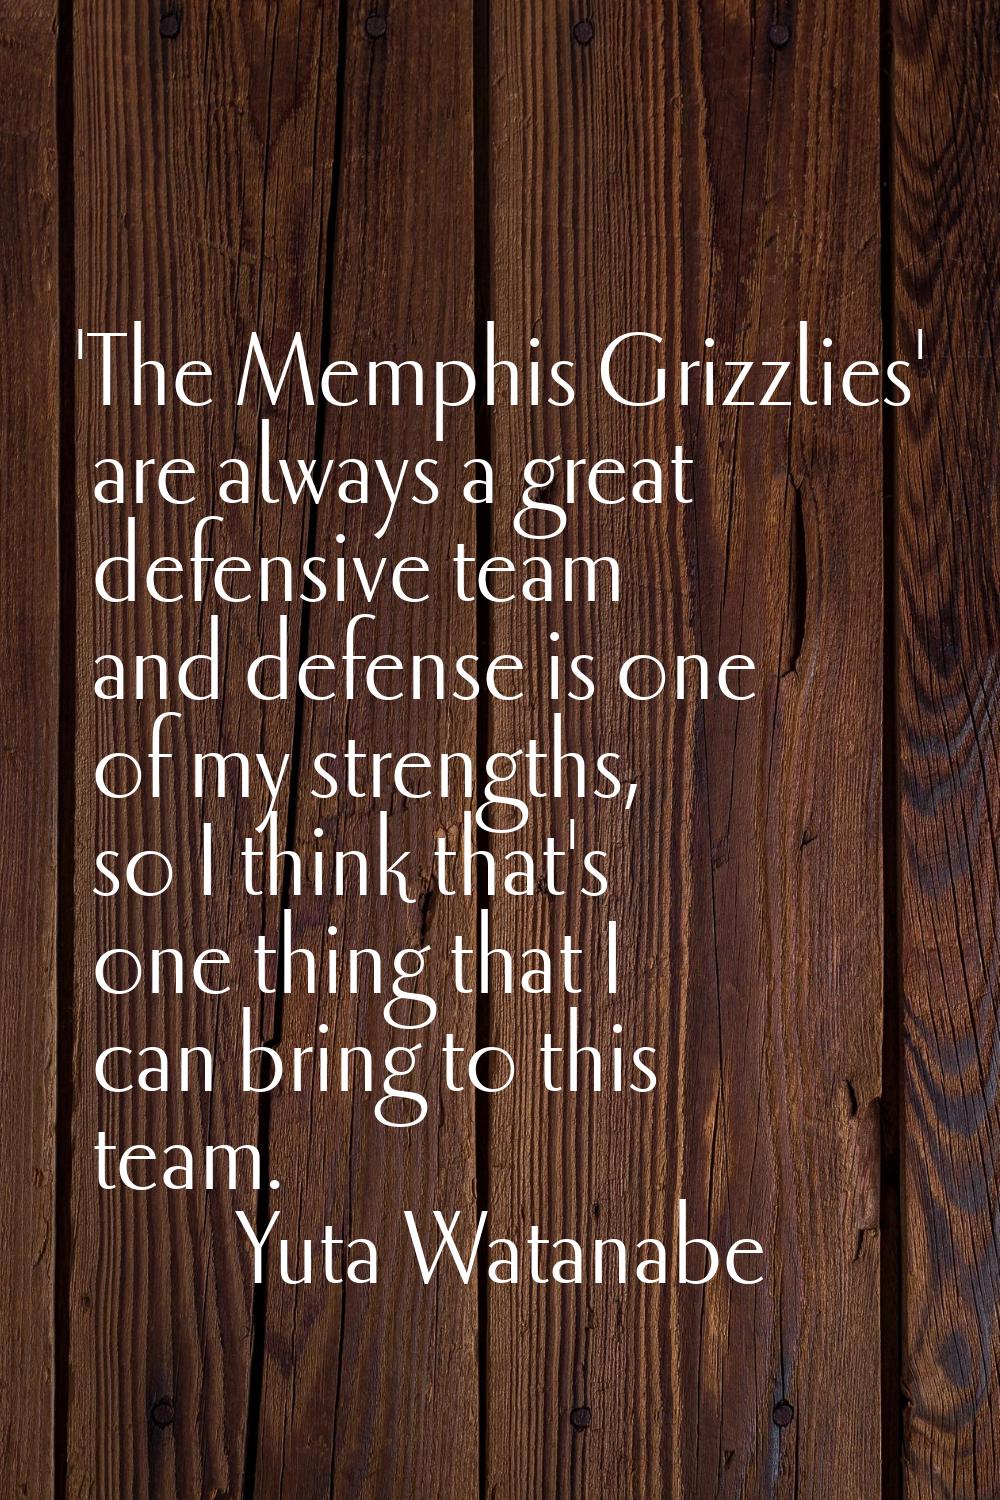 'The Memphis Grizzlies' are always a great defensive team and defense is one of my strengths, so I 